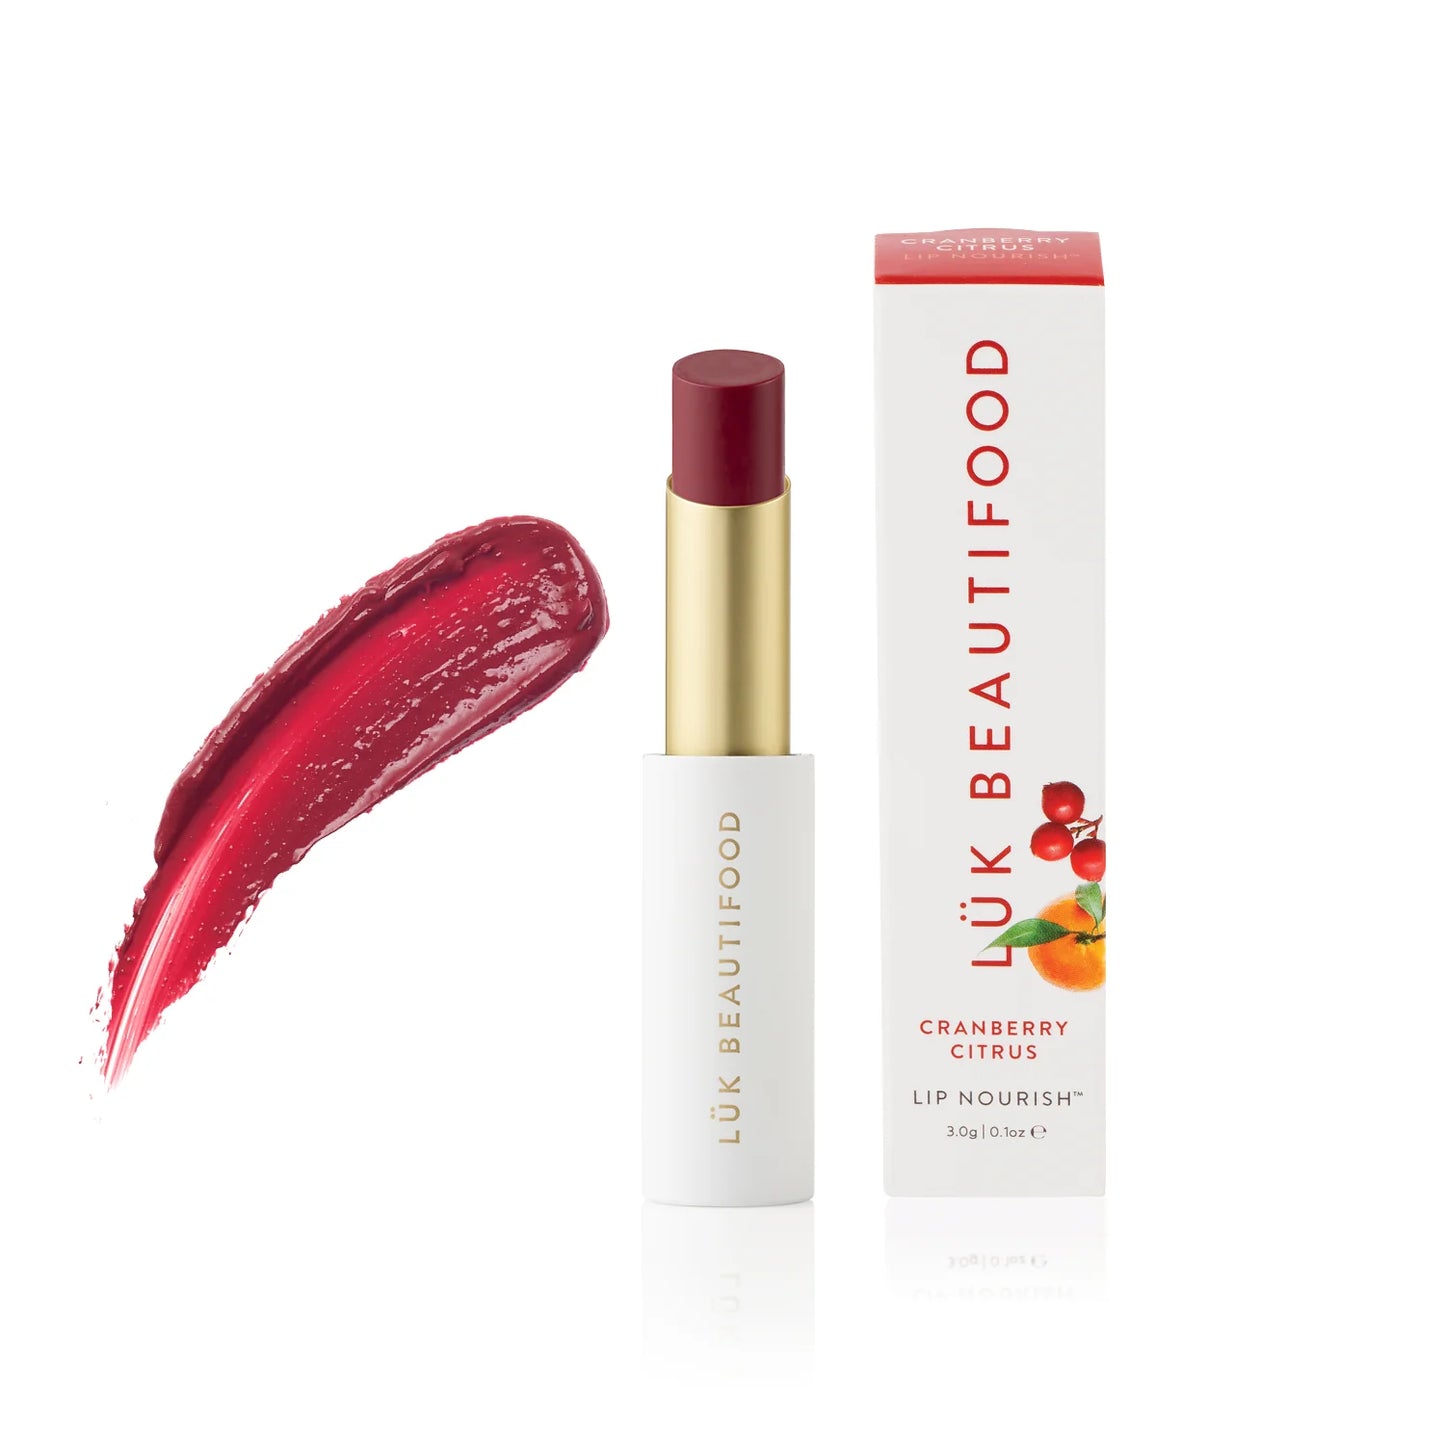 Lip Nourish™ - Cranberry Citrus Fiery red. Medium buildable coverage. Tastes of cranberry and orange.